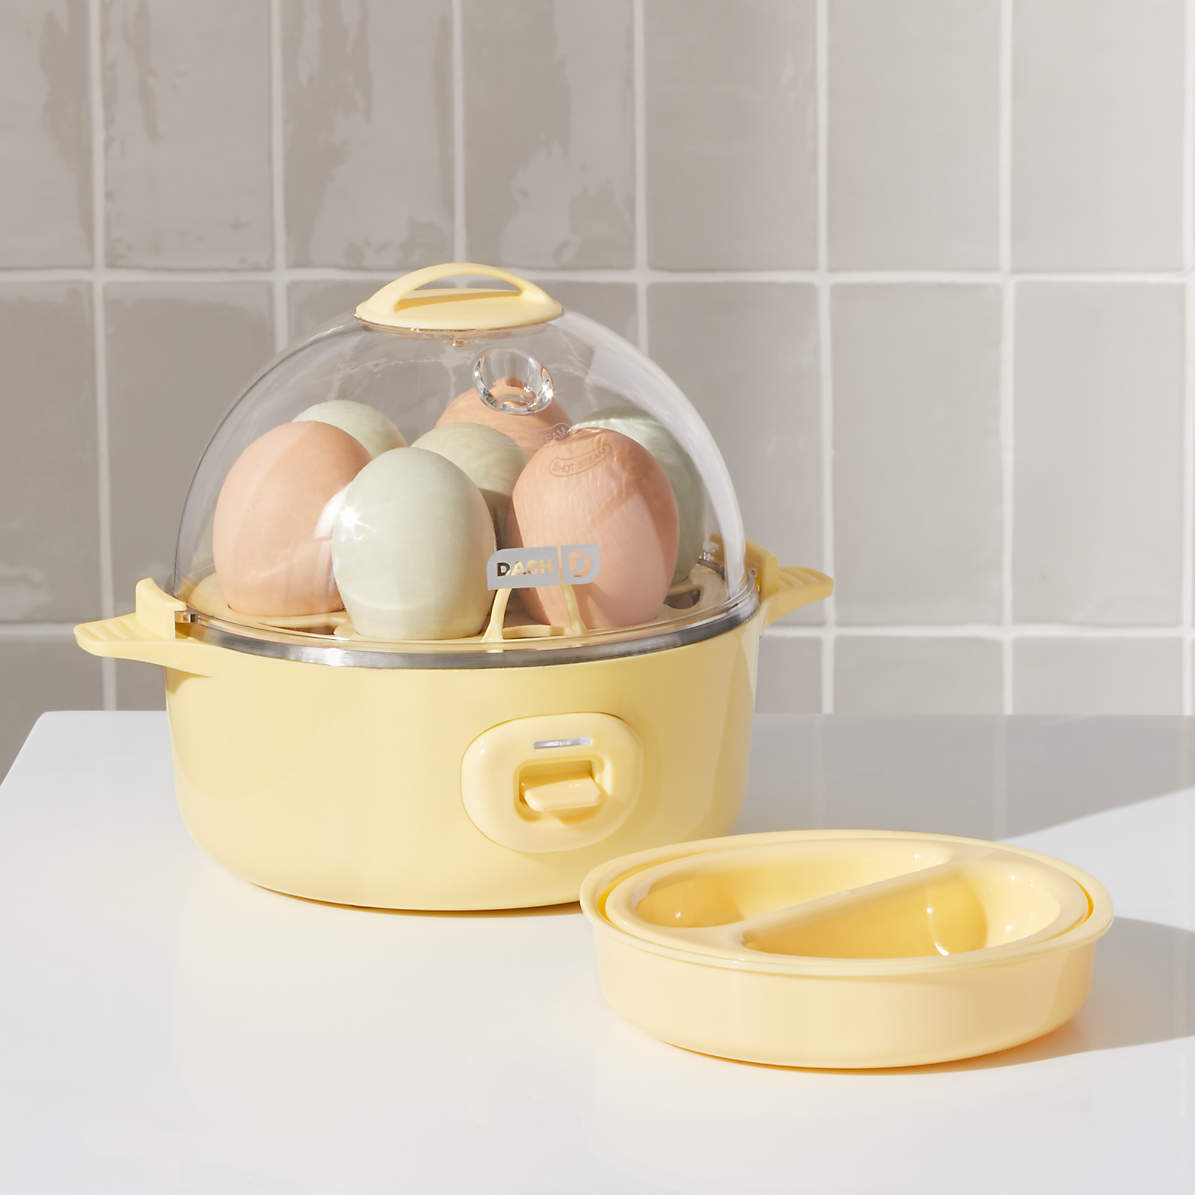 Perfect Egg Timer  Crate and Barrel UAE